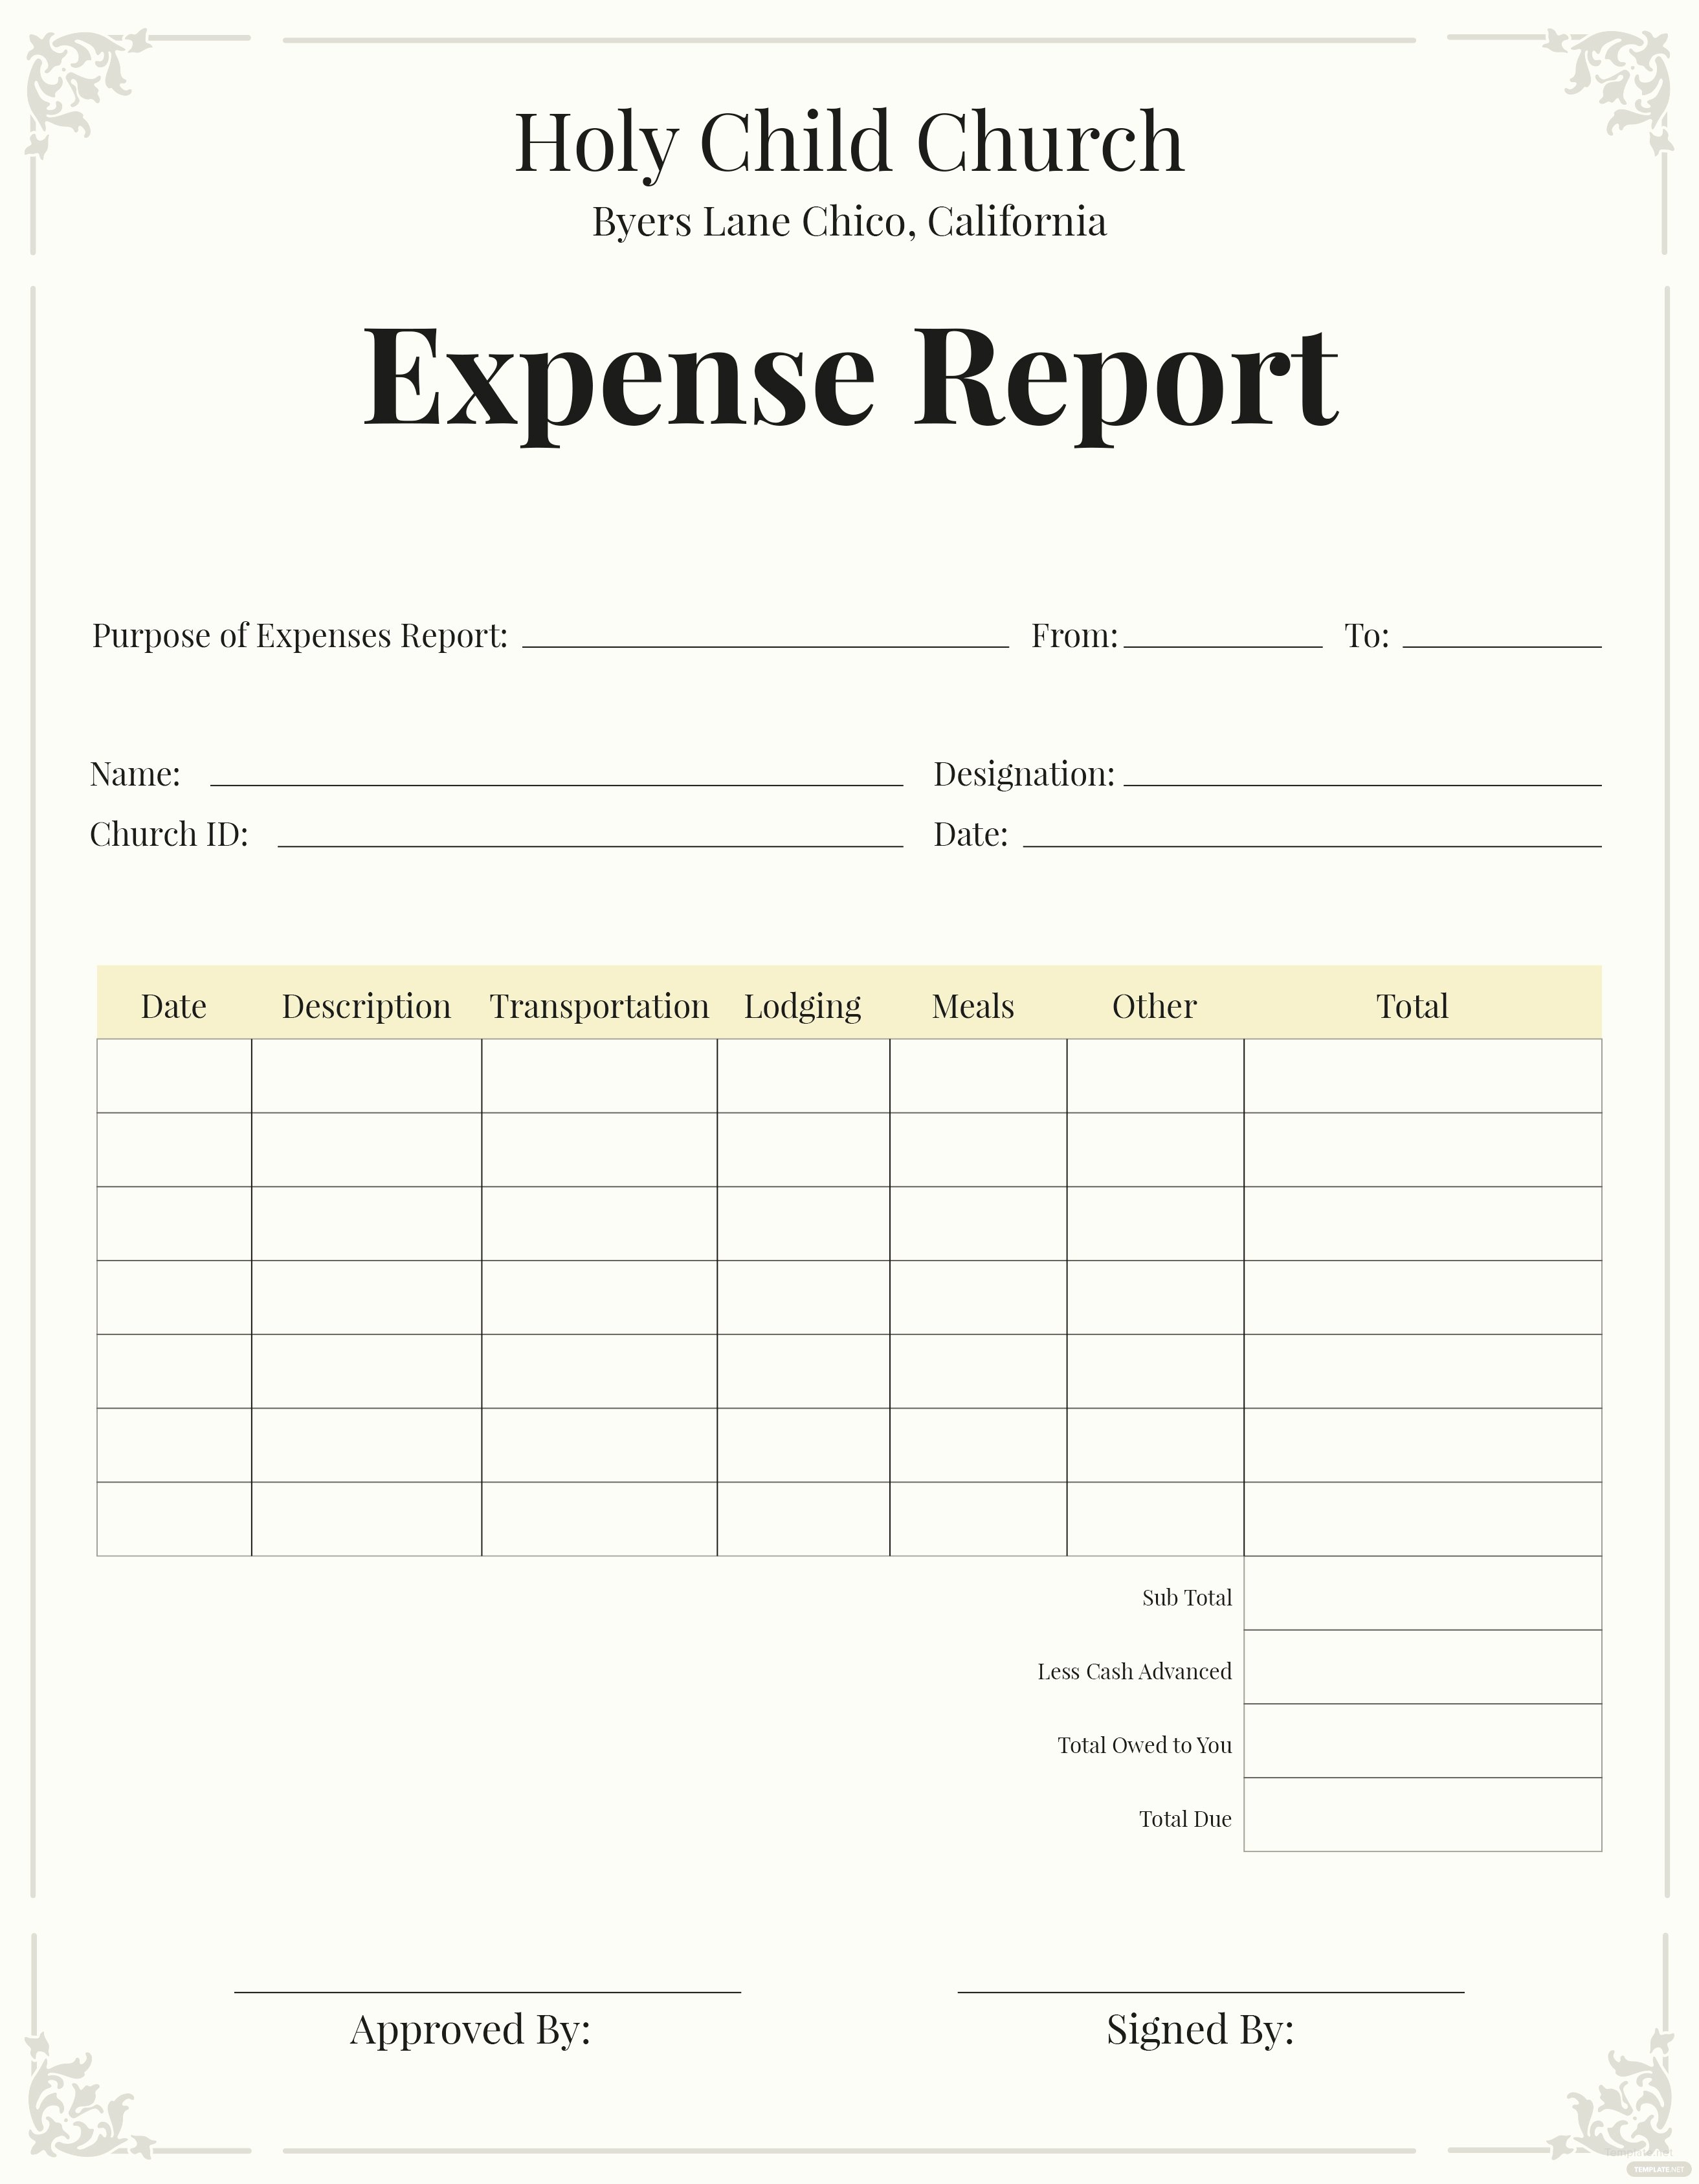 Church Income and Expense Statement Template Lovely Free Church Expense Report Template In Microsoft Word